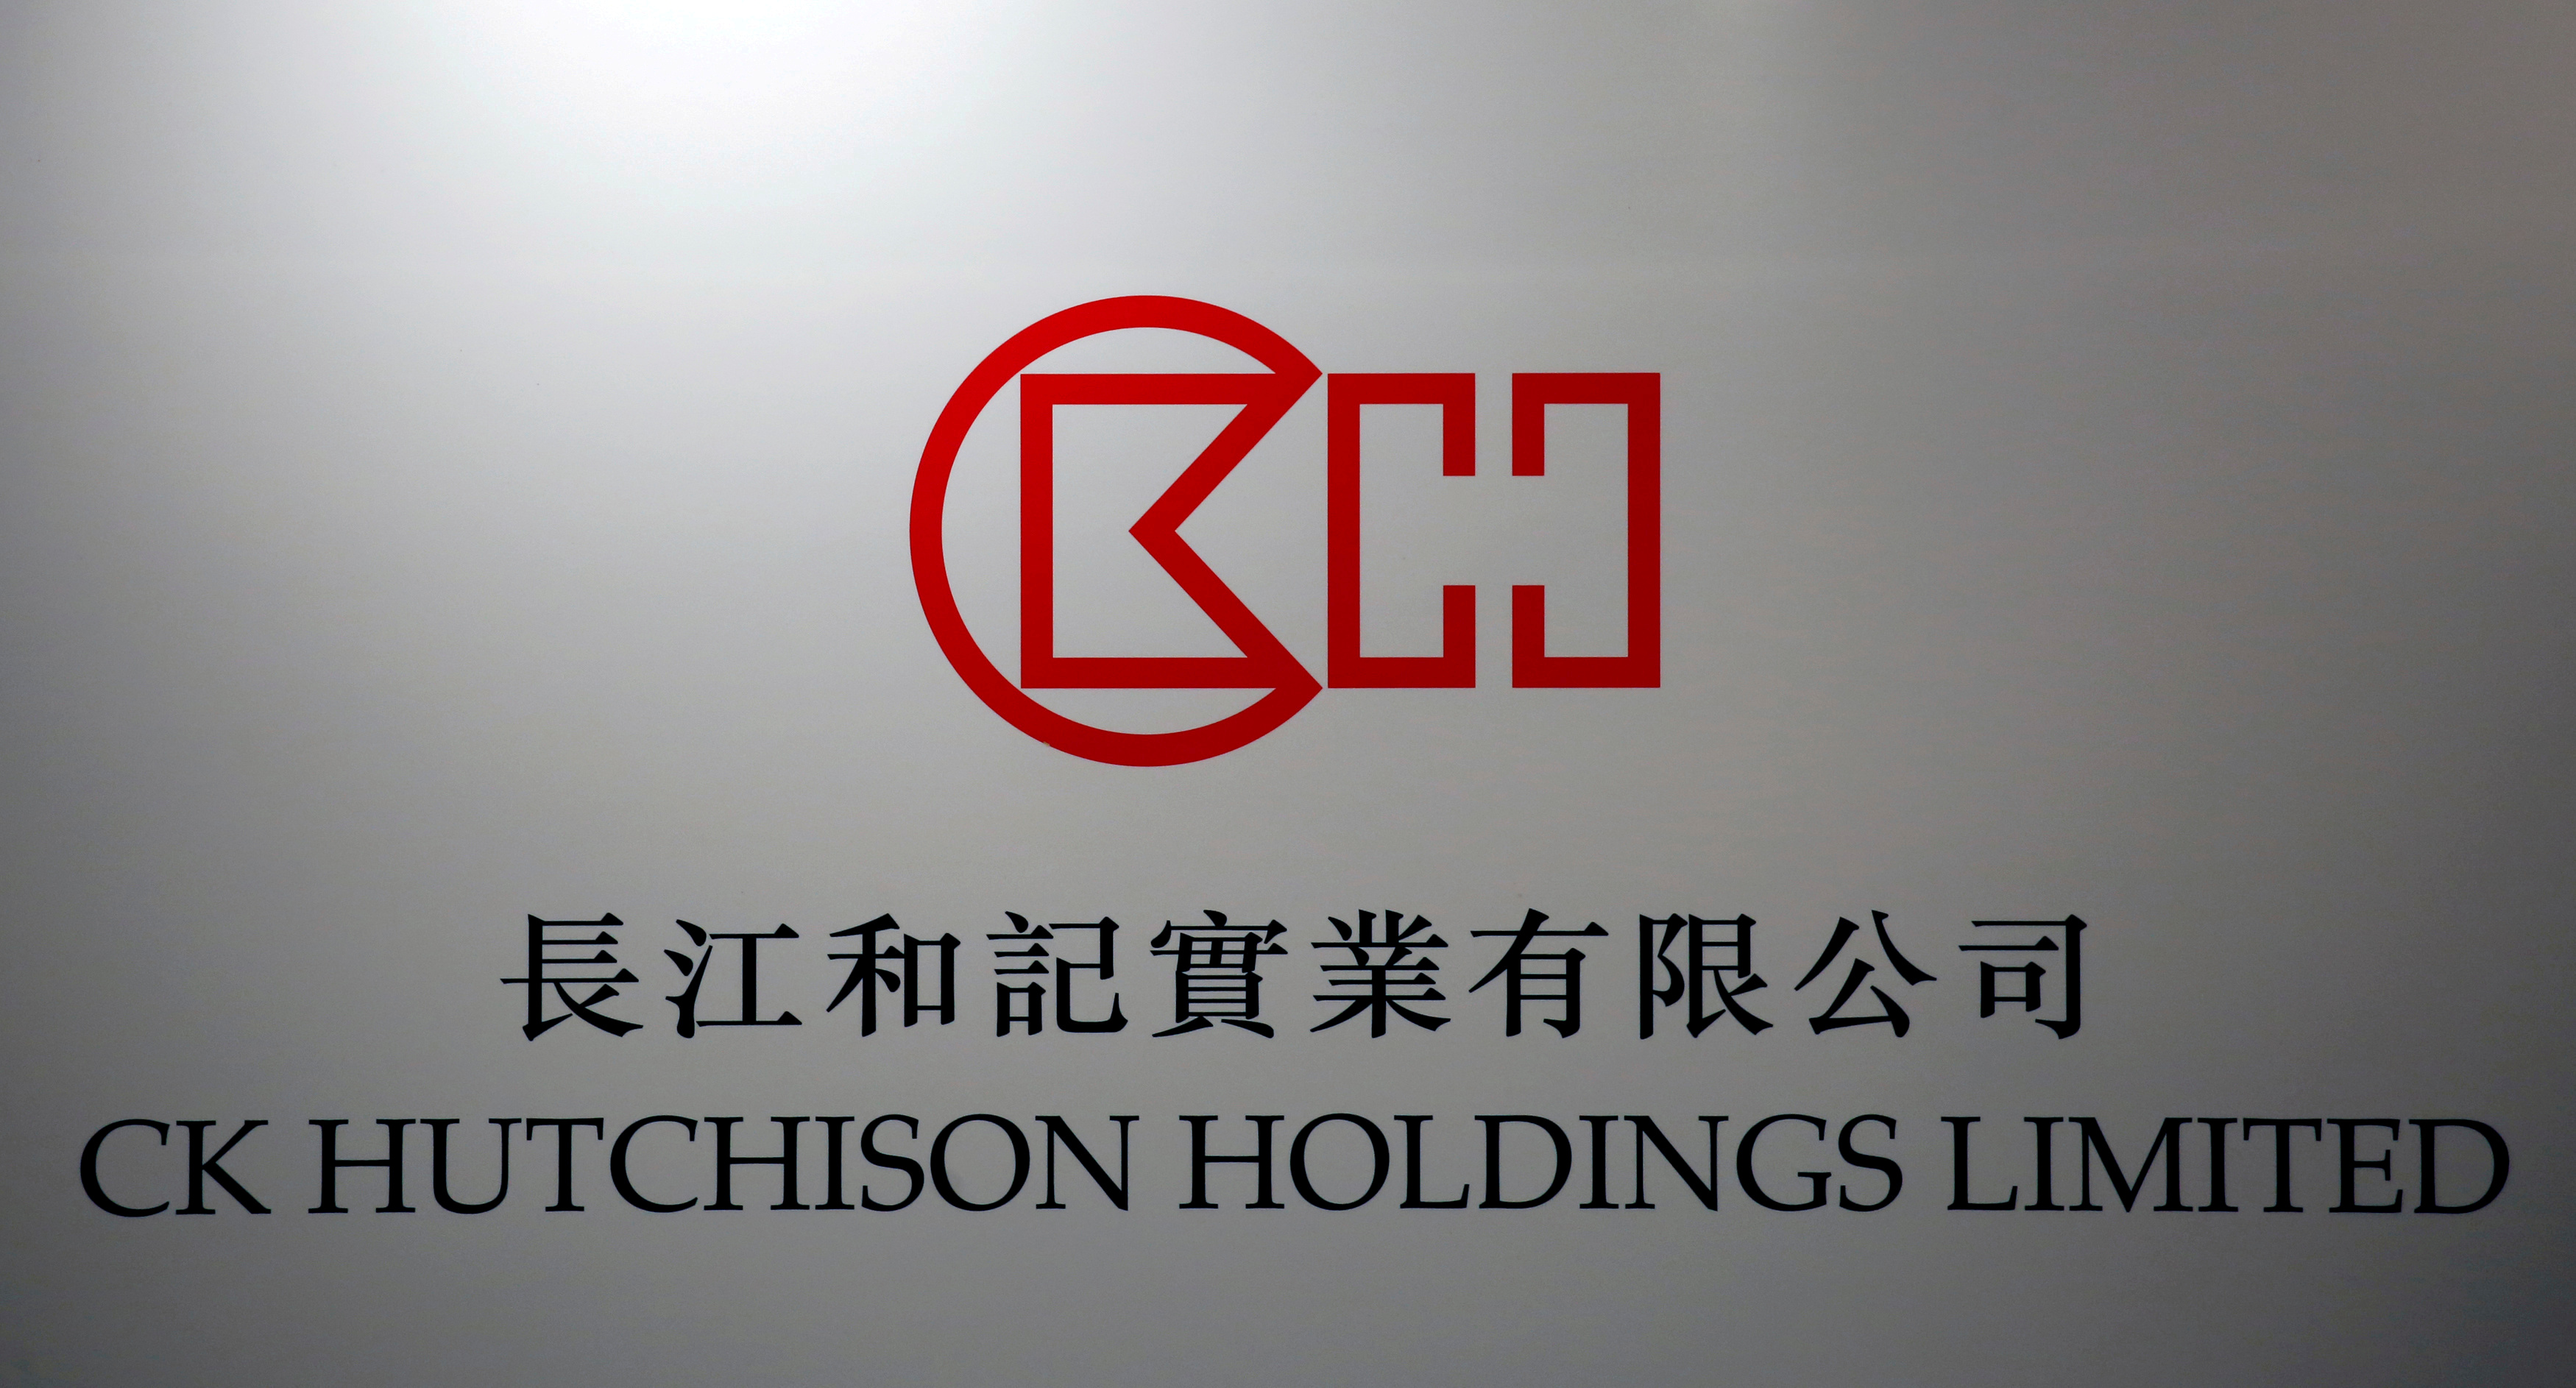 FILE PHOTO: The company logo of CK Hutchison Holdings is displayed at a news conference in Hong Kong